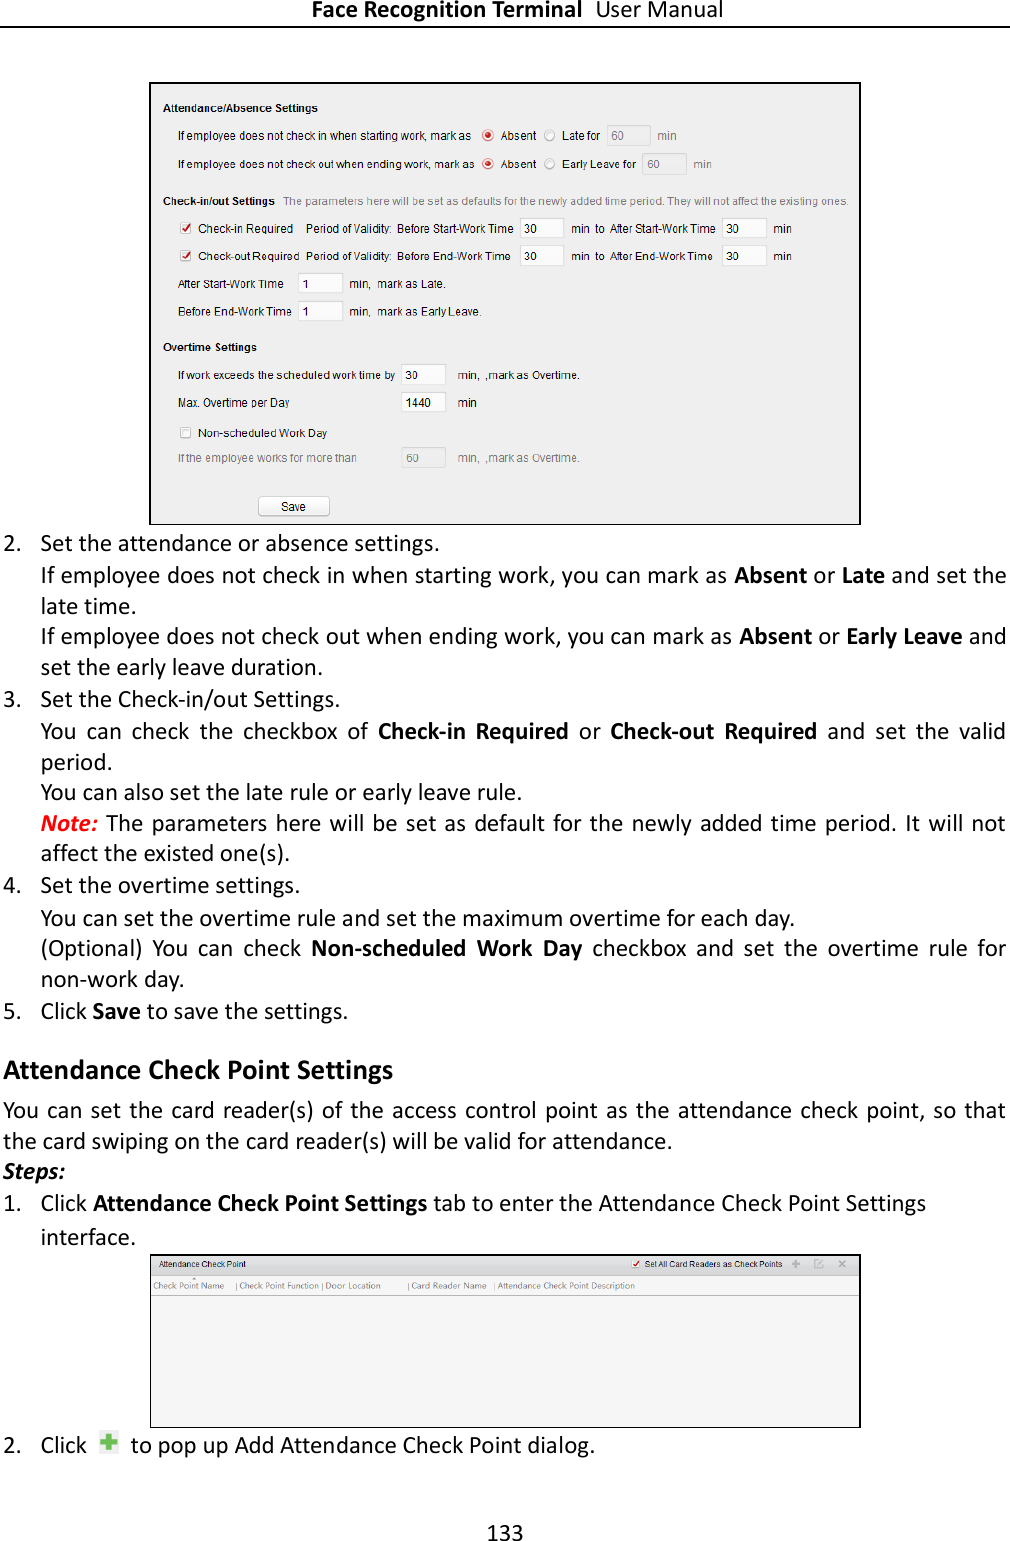 Face Recognition Terminal User Manual 133    2. Set the attendance or absence settings. If employee does not check in when starting work, you can mark as Absent or Late and set the late time. If employee does not check out when ending work, you can mark as Absent or Early Leave and set the early leave duration.  3. Set the Check-in/out Settings. You  can  check  the  checkbox  of  Check-in  Required  or  Check-out  Required  and  set  the  valid period. You can also set the late rule or early leave rule.   Note: The parameters here will be set as default for the newly added time period. It will not affect the existed one(s). 4. Set the overtime settings. You can set the overtime rule and set the maximum overtime for each day. (Optional)  You  can  check  Non-scheduled  Work  Day  checkbox  and  set  the  overtime  rule  for non-work day. 5. Click Save to save the settings. Attendance Check Point Settings You can set the card reader(s) of the access control point as the attendance check point, so that the card swiping on the card reader(s) will be valid for attendance. Steps: 1. Click Attendance Check Point Settings tab to enter the Attendance Check Point Settings interface.  2. Click    to pop up Add Attendance Check Point dialog. 